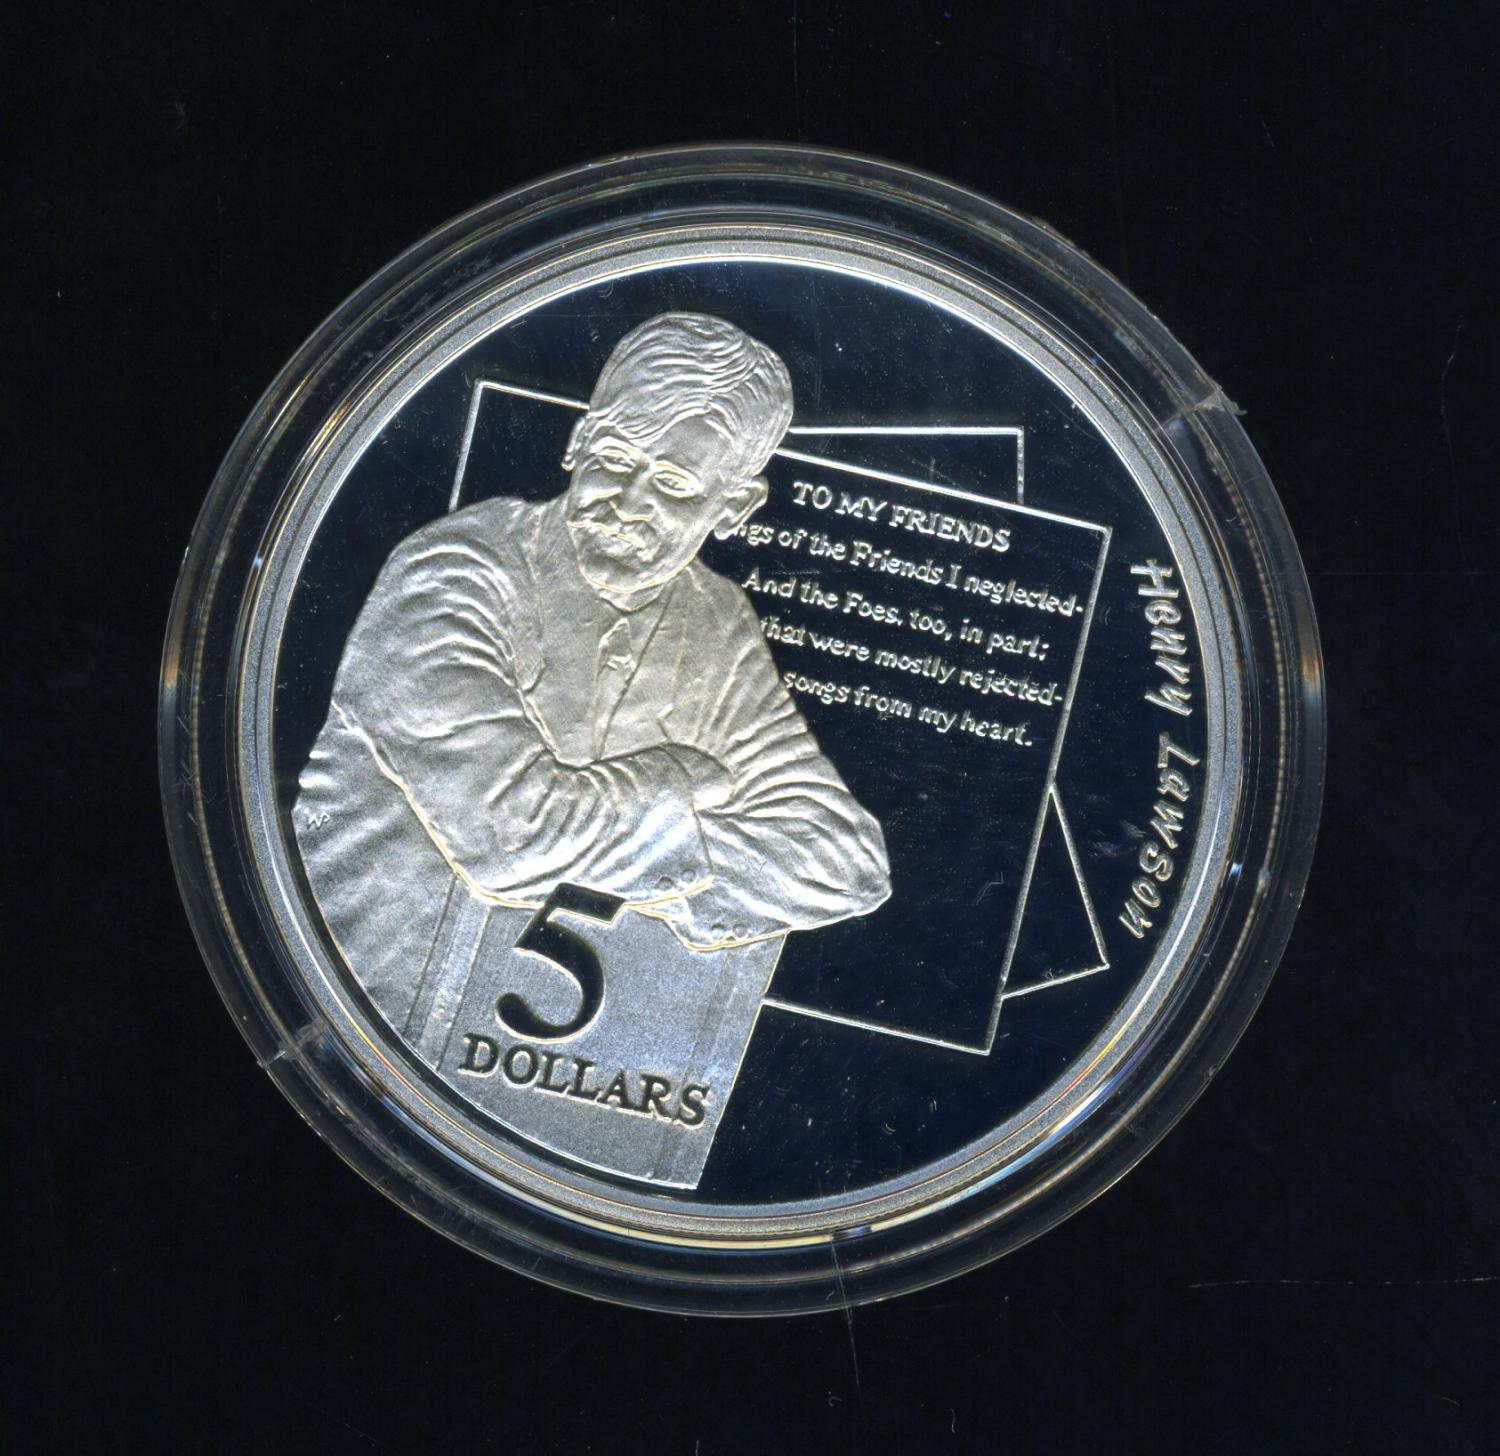 Thumbnail for 1996 Australian $5 Silver Coin From Masterpieces Set - Henry Lawson.  The Coin is Sterling Silver and contains over 1oz of Pure Silver.